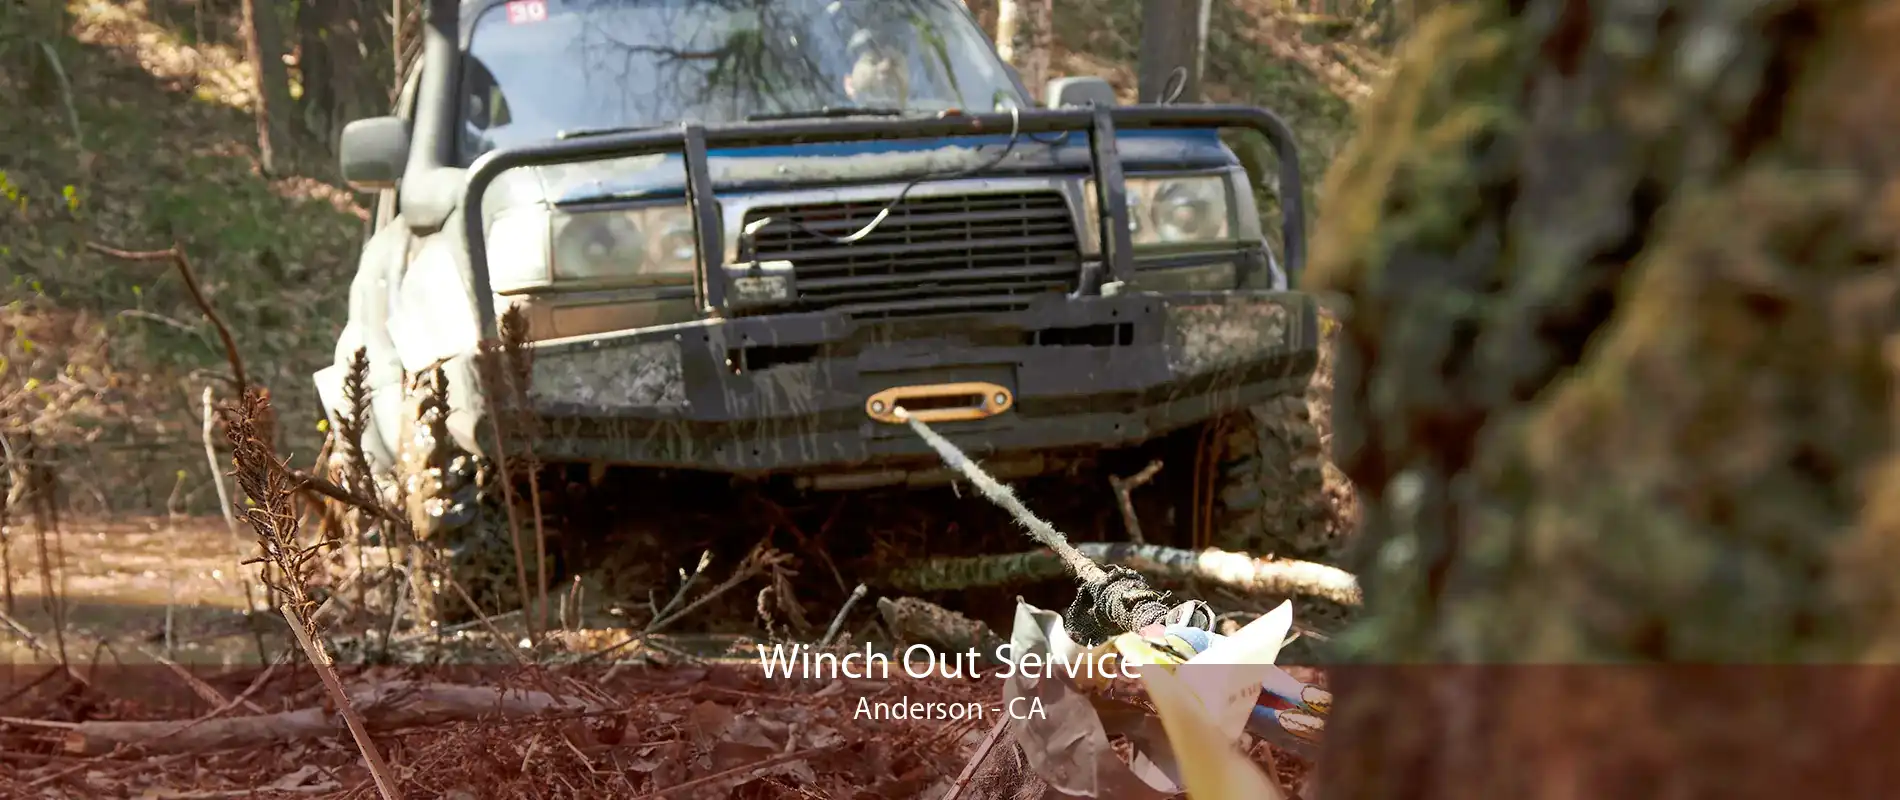 Winch Out Service Anderson - CA